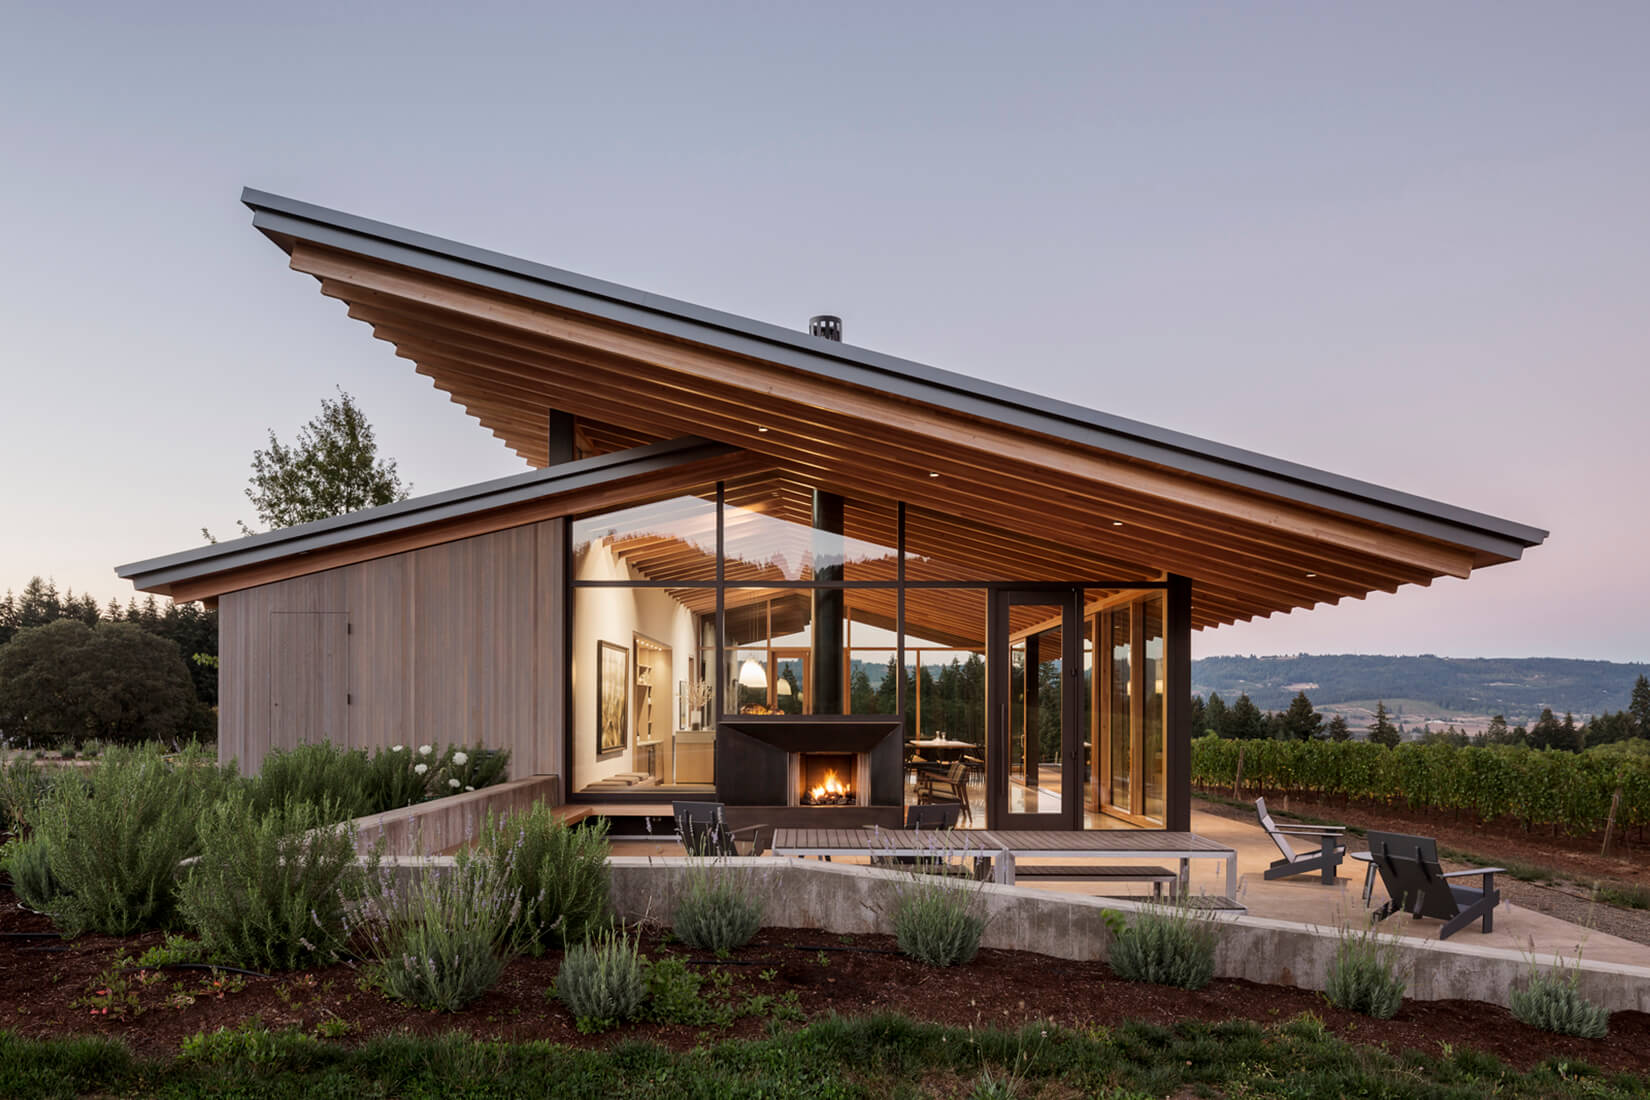 photograph depicting the exterior of a vineyard tasting room with a dramatically sloped roof